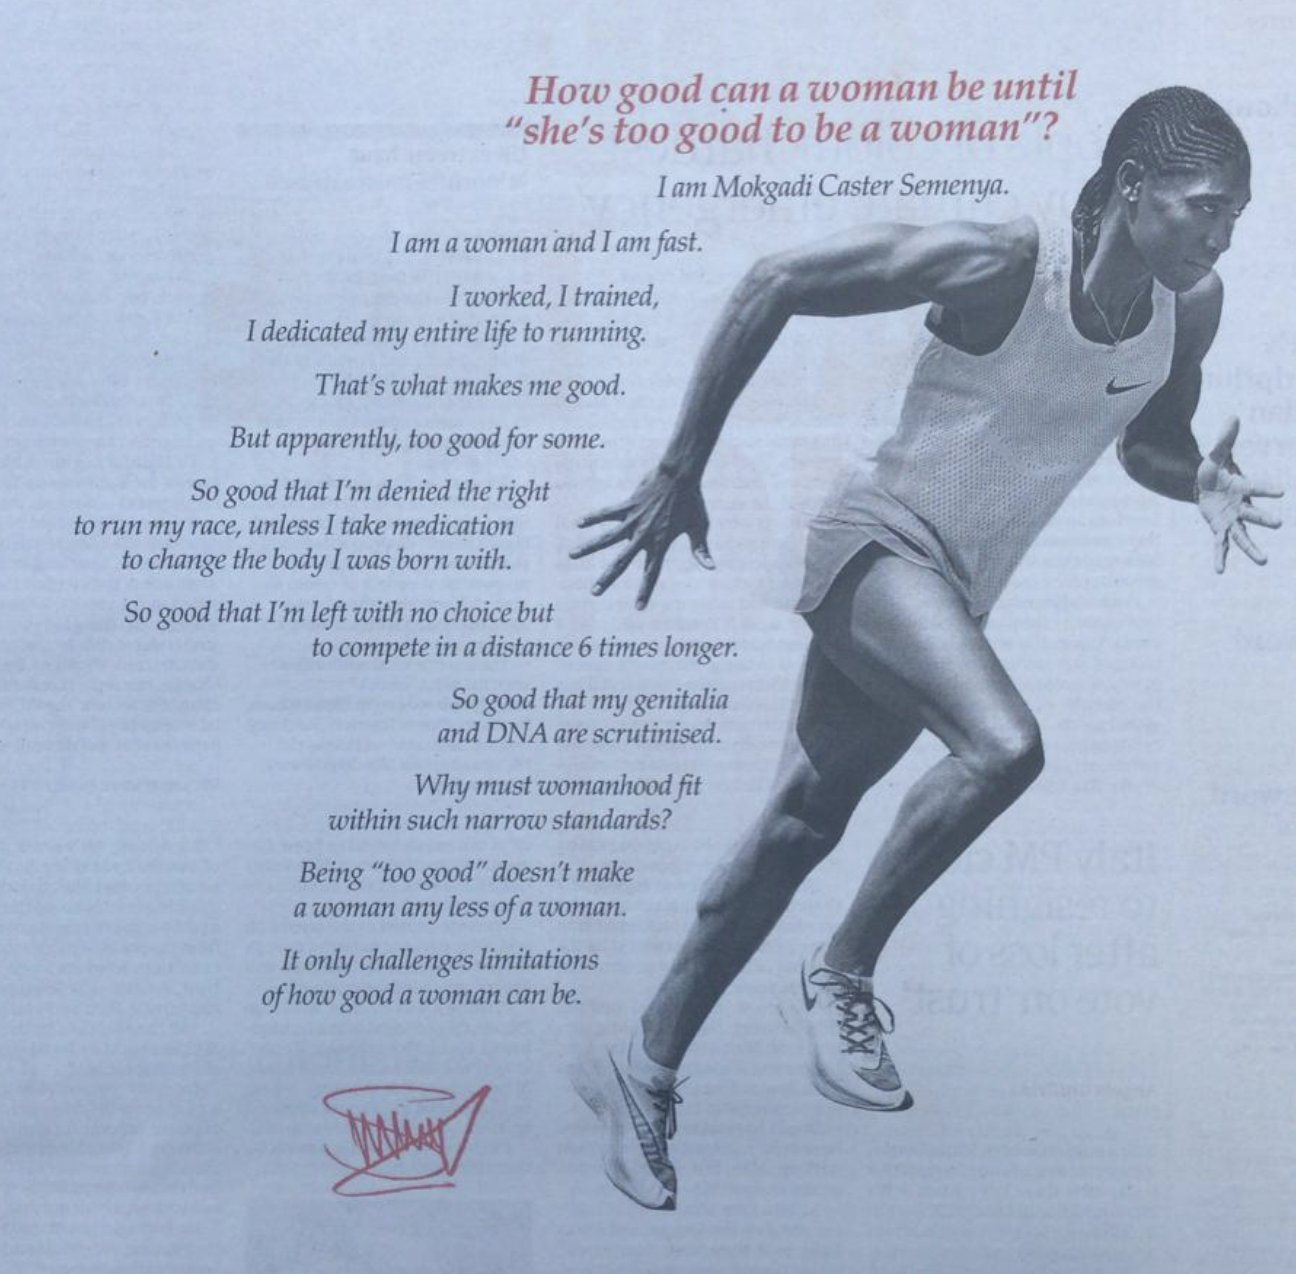 Controversial issues concerning sex are set to be discussed at the World Athletics Council meeting ©Nike